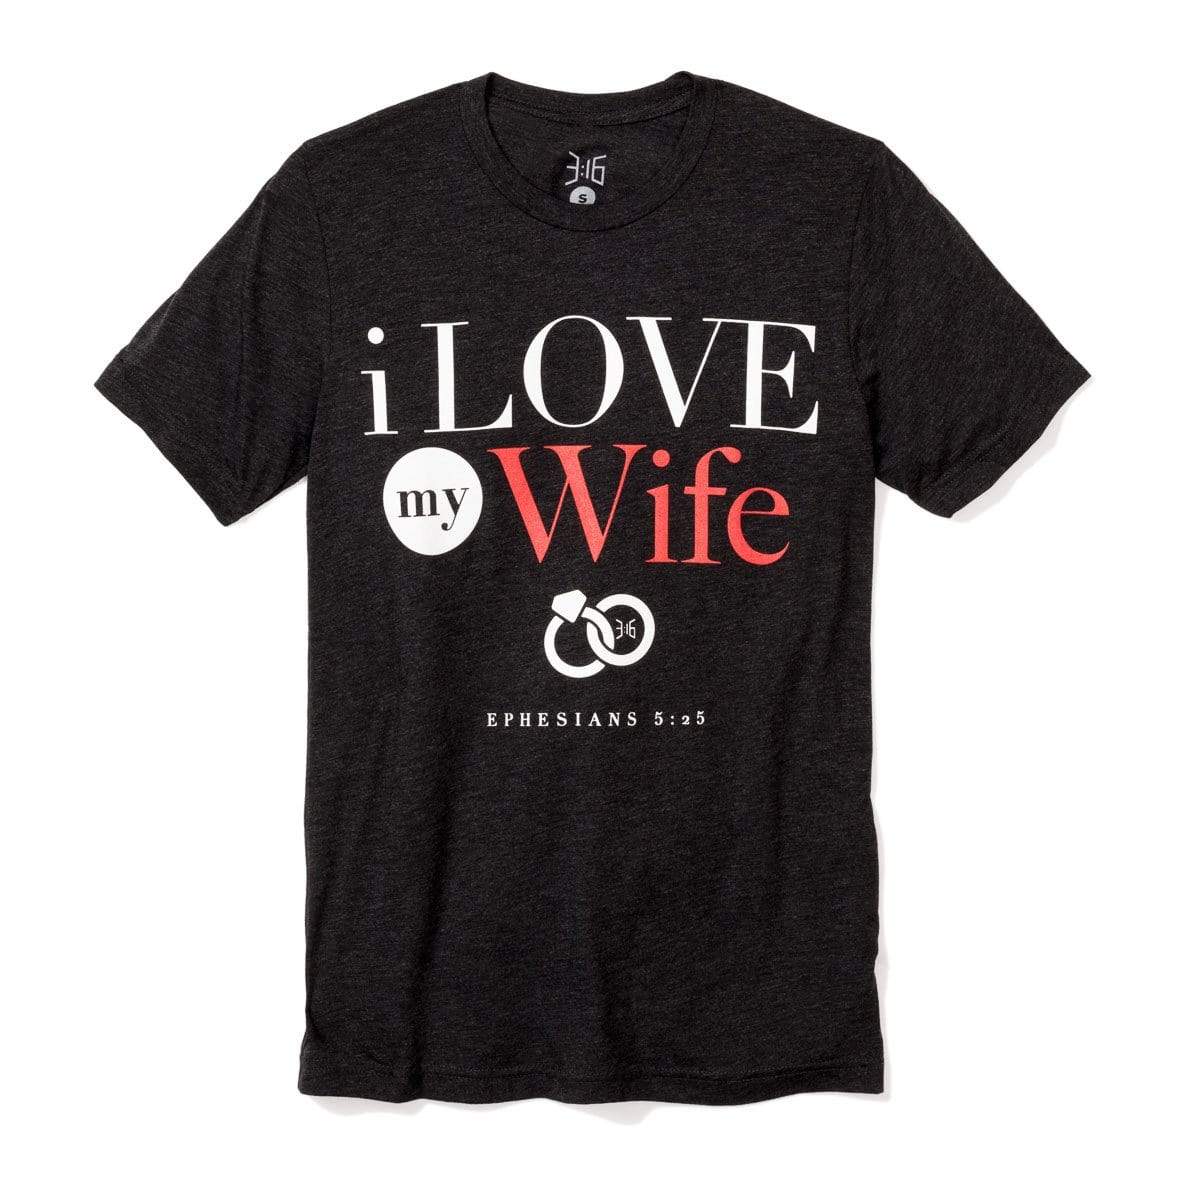 3:16 Collection Apparel I Love My Wife T-Shirt